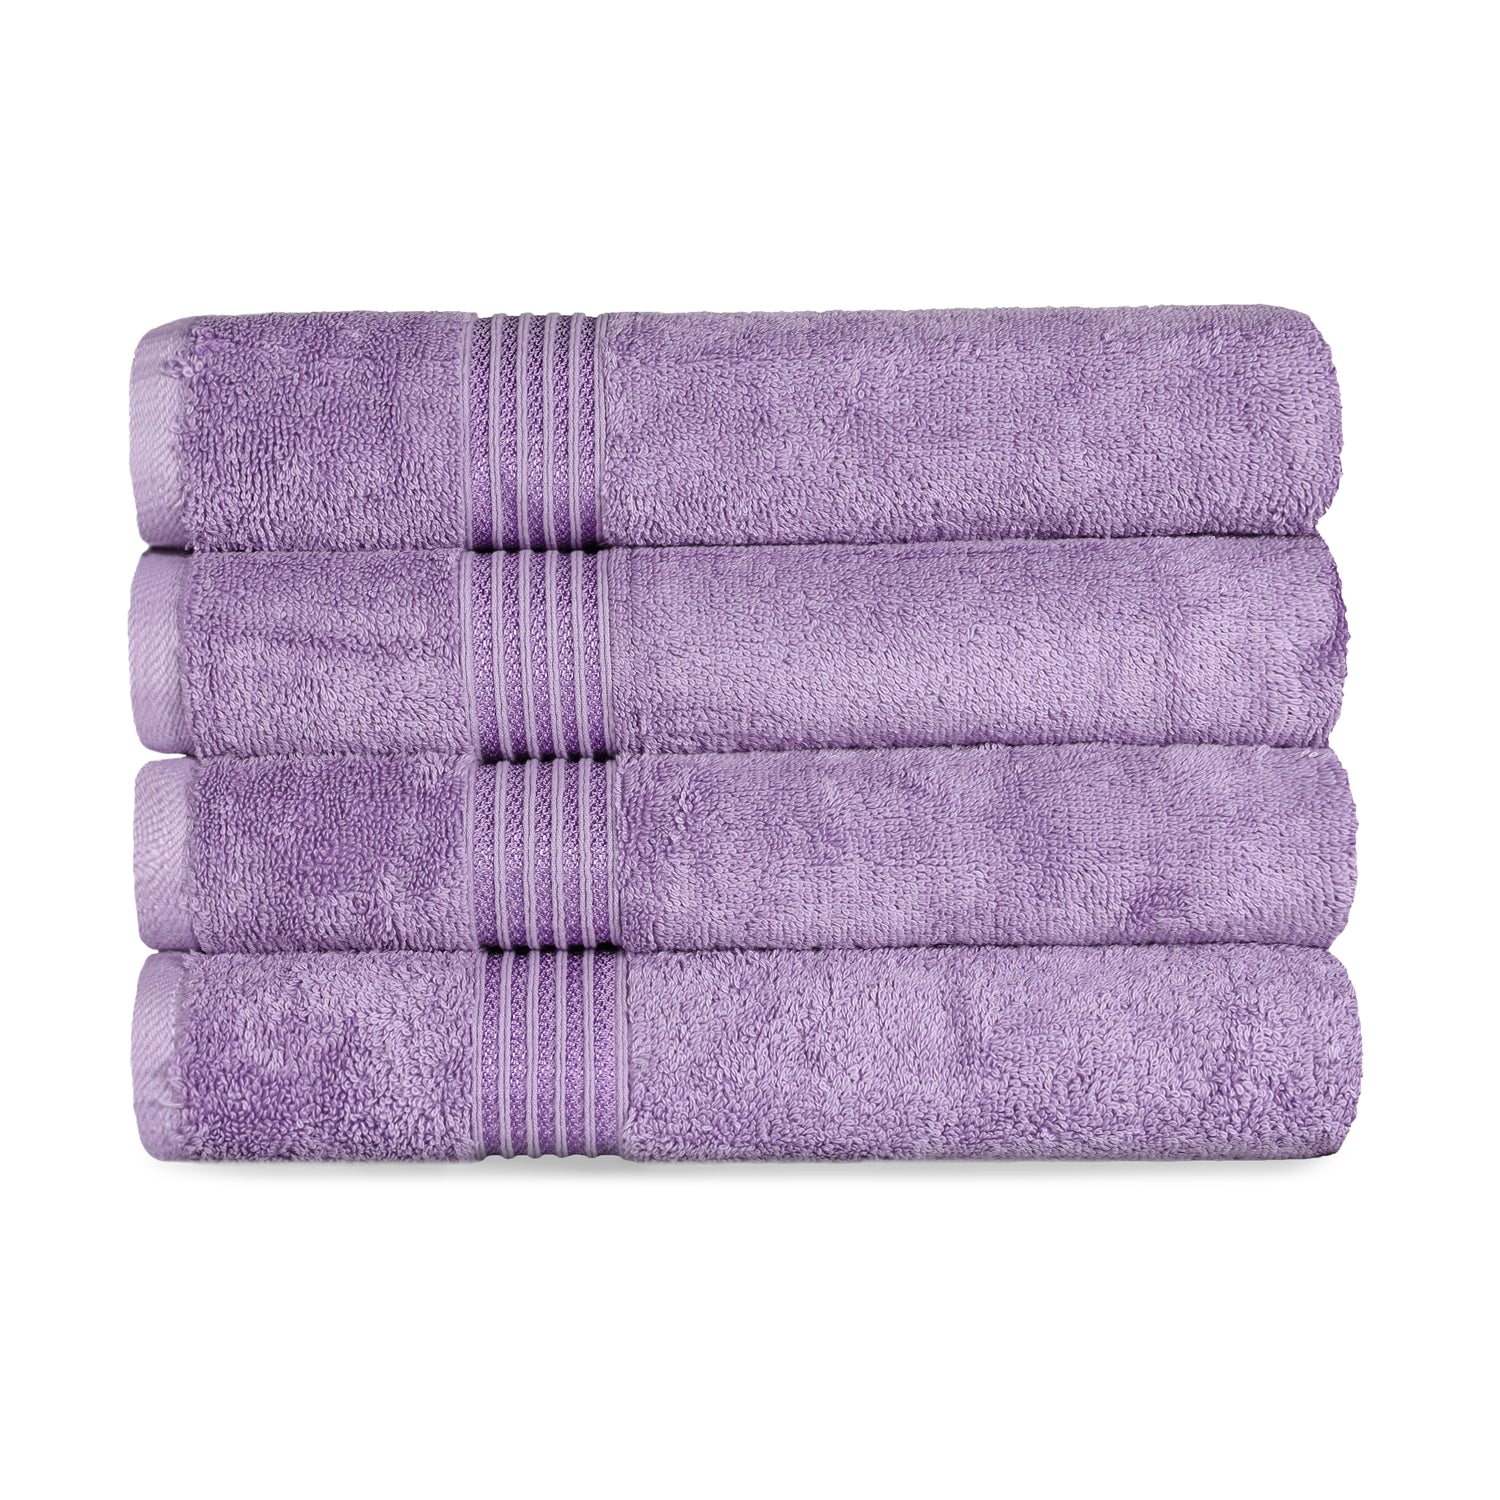 Egyptian Cotton Highly Absorbent Solid 4-Piece Ultra Soft Bath Towel Set - Royal Purple